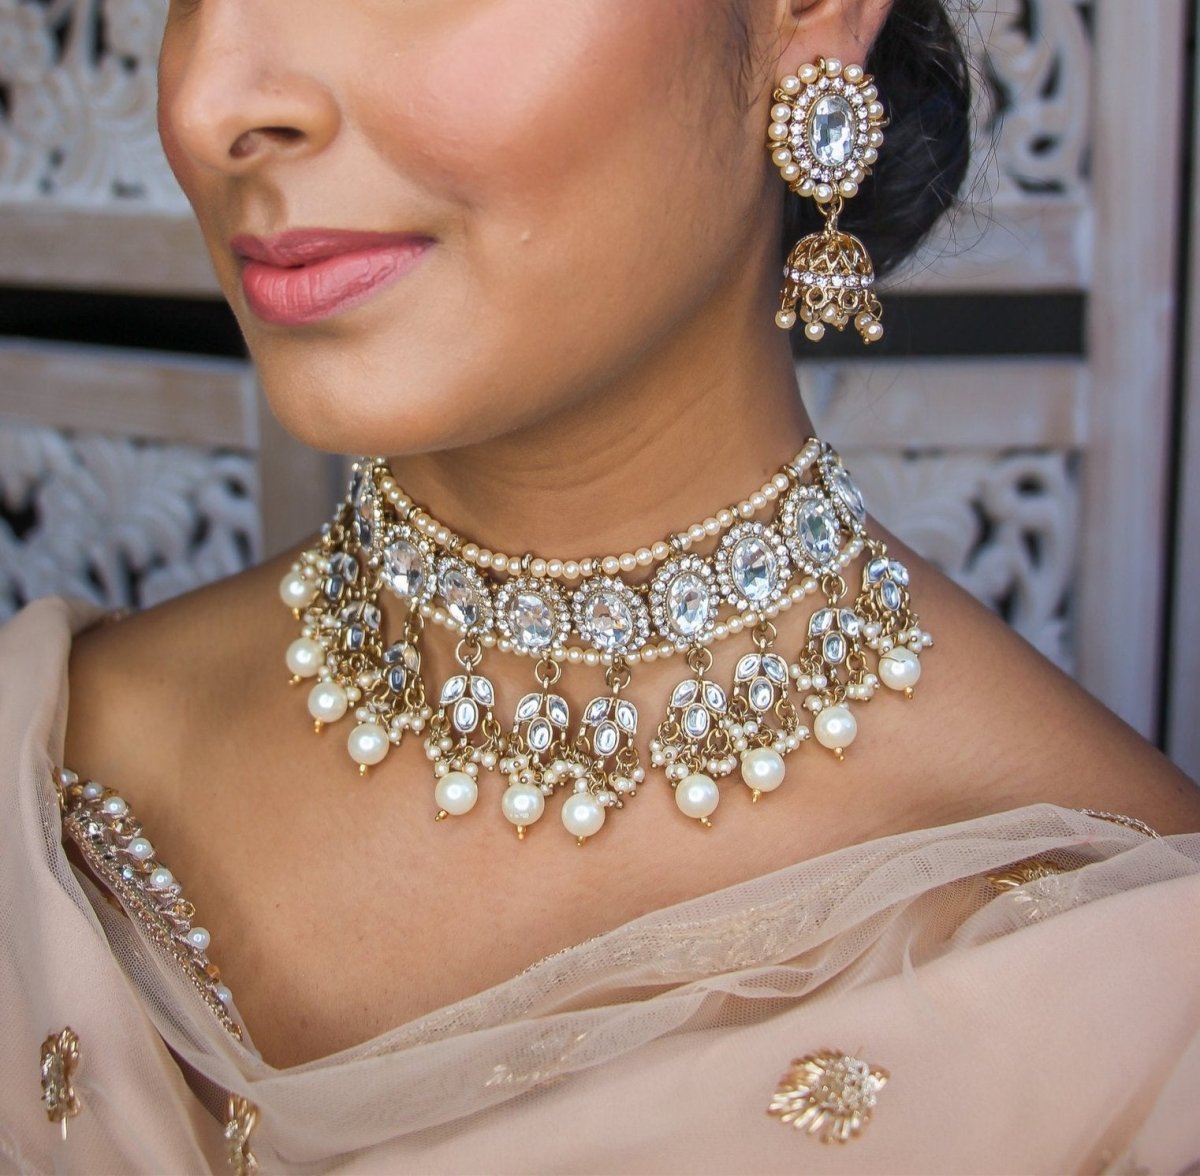 Most Attractive Bridal Choker Necklace Designs that will Sparkle your Eyes  | Choker necklace designs, Bridal fashion jewelry, Bridal necklace designs